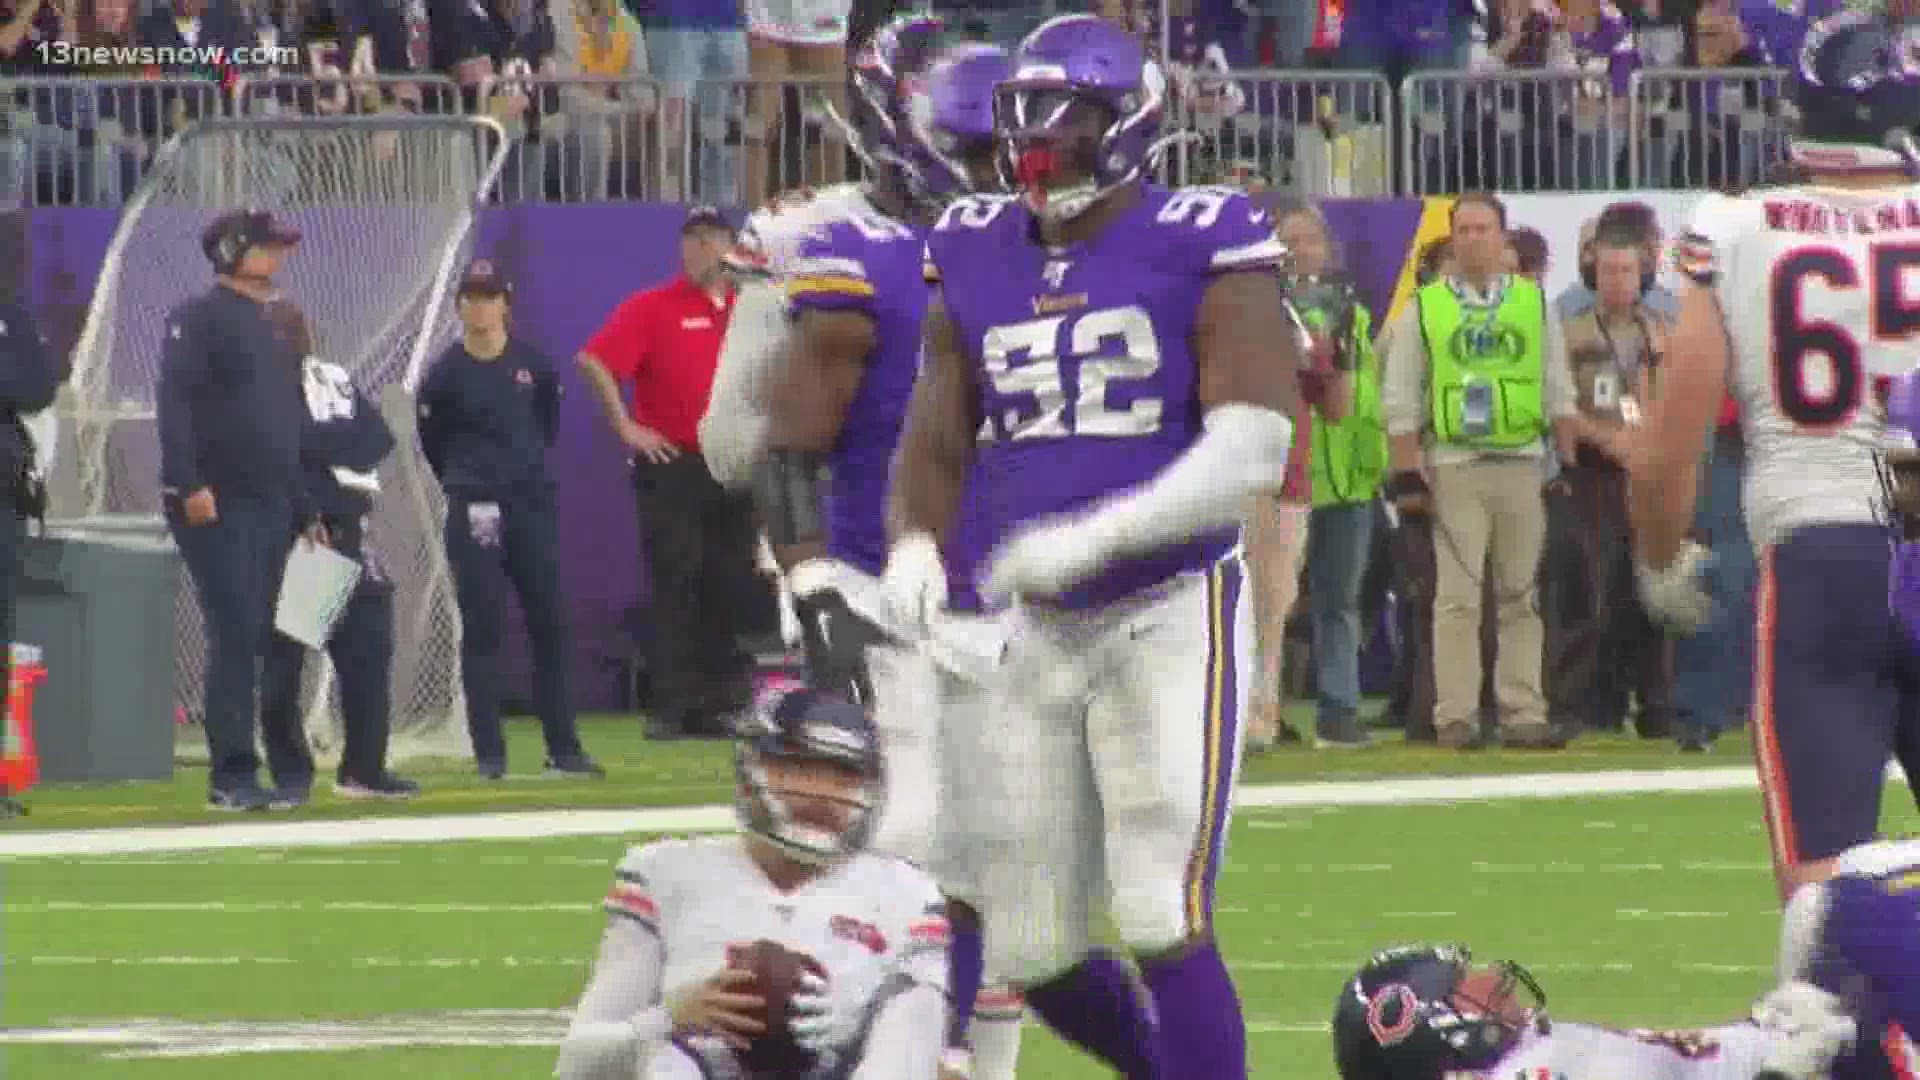 The 24 year old is trying to make a difference with the Vikings this upcoming season.